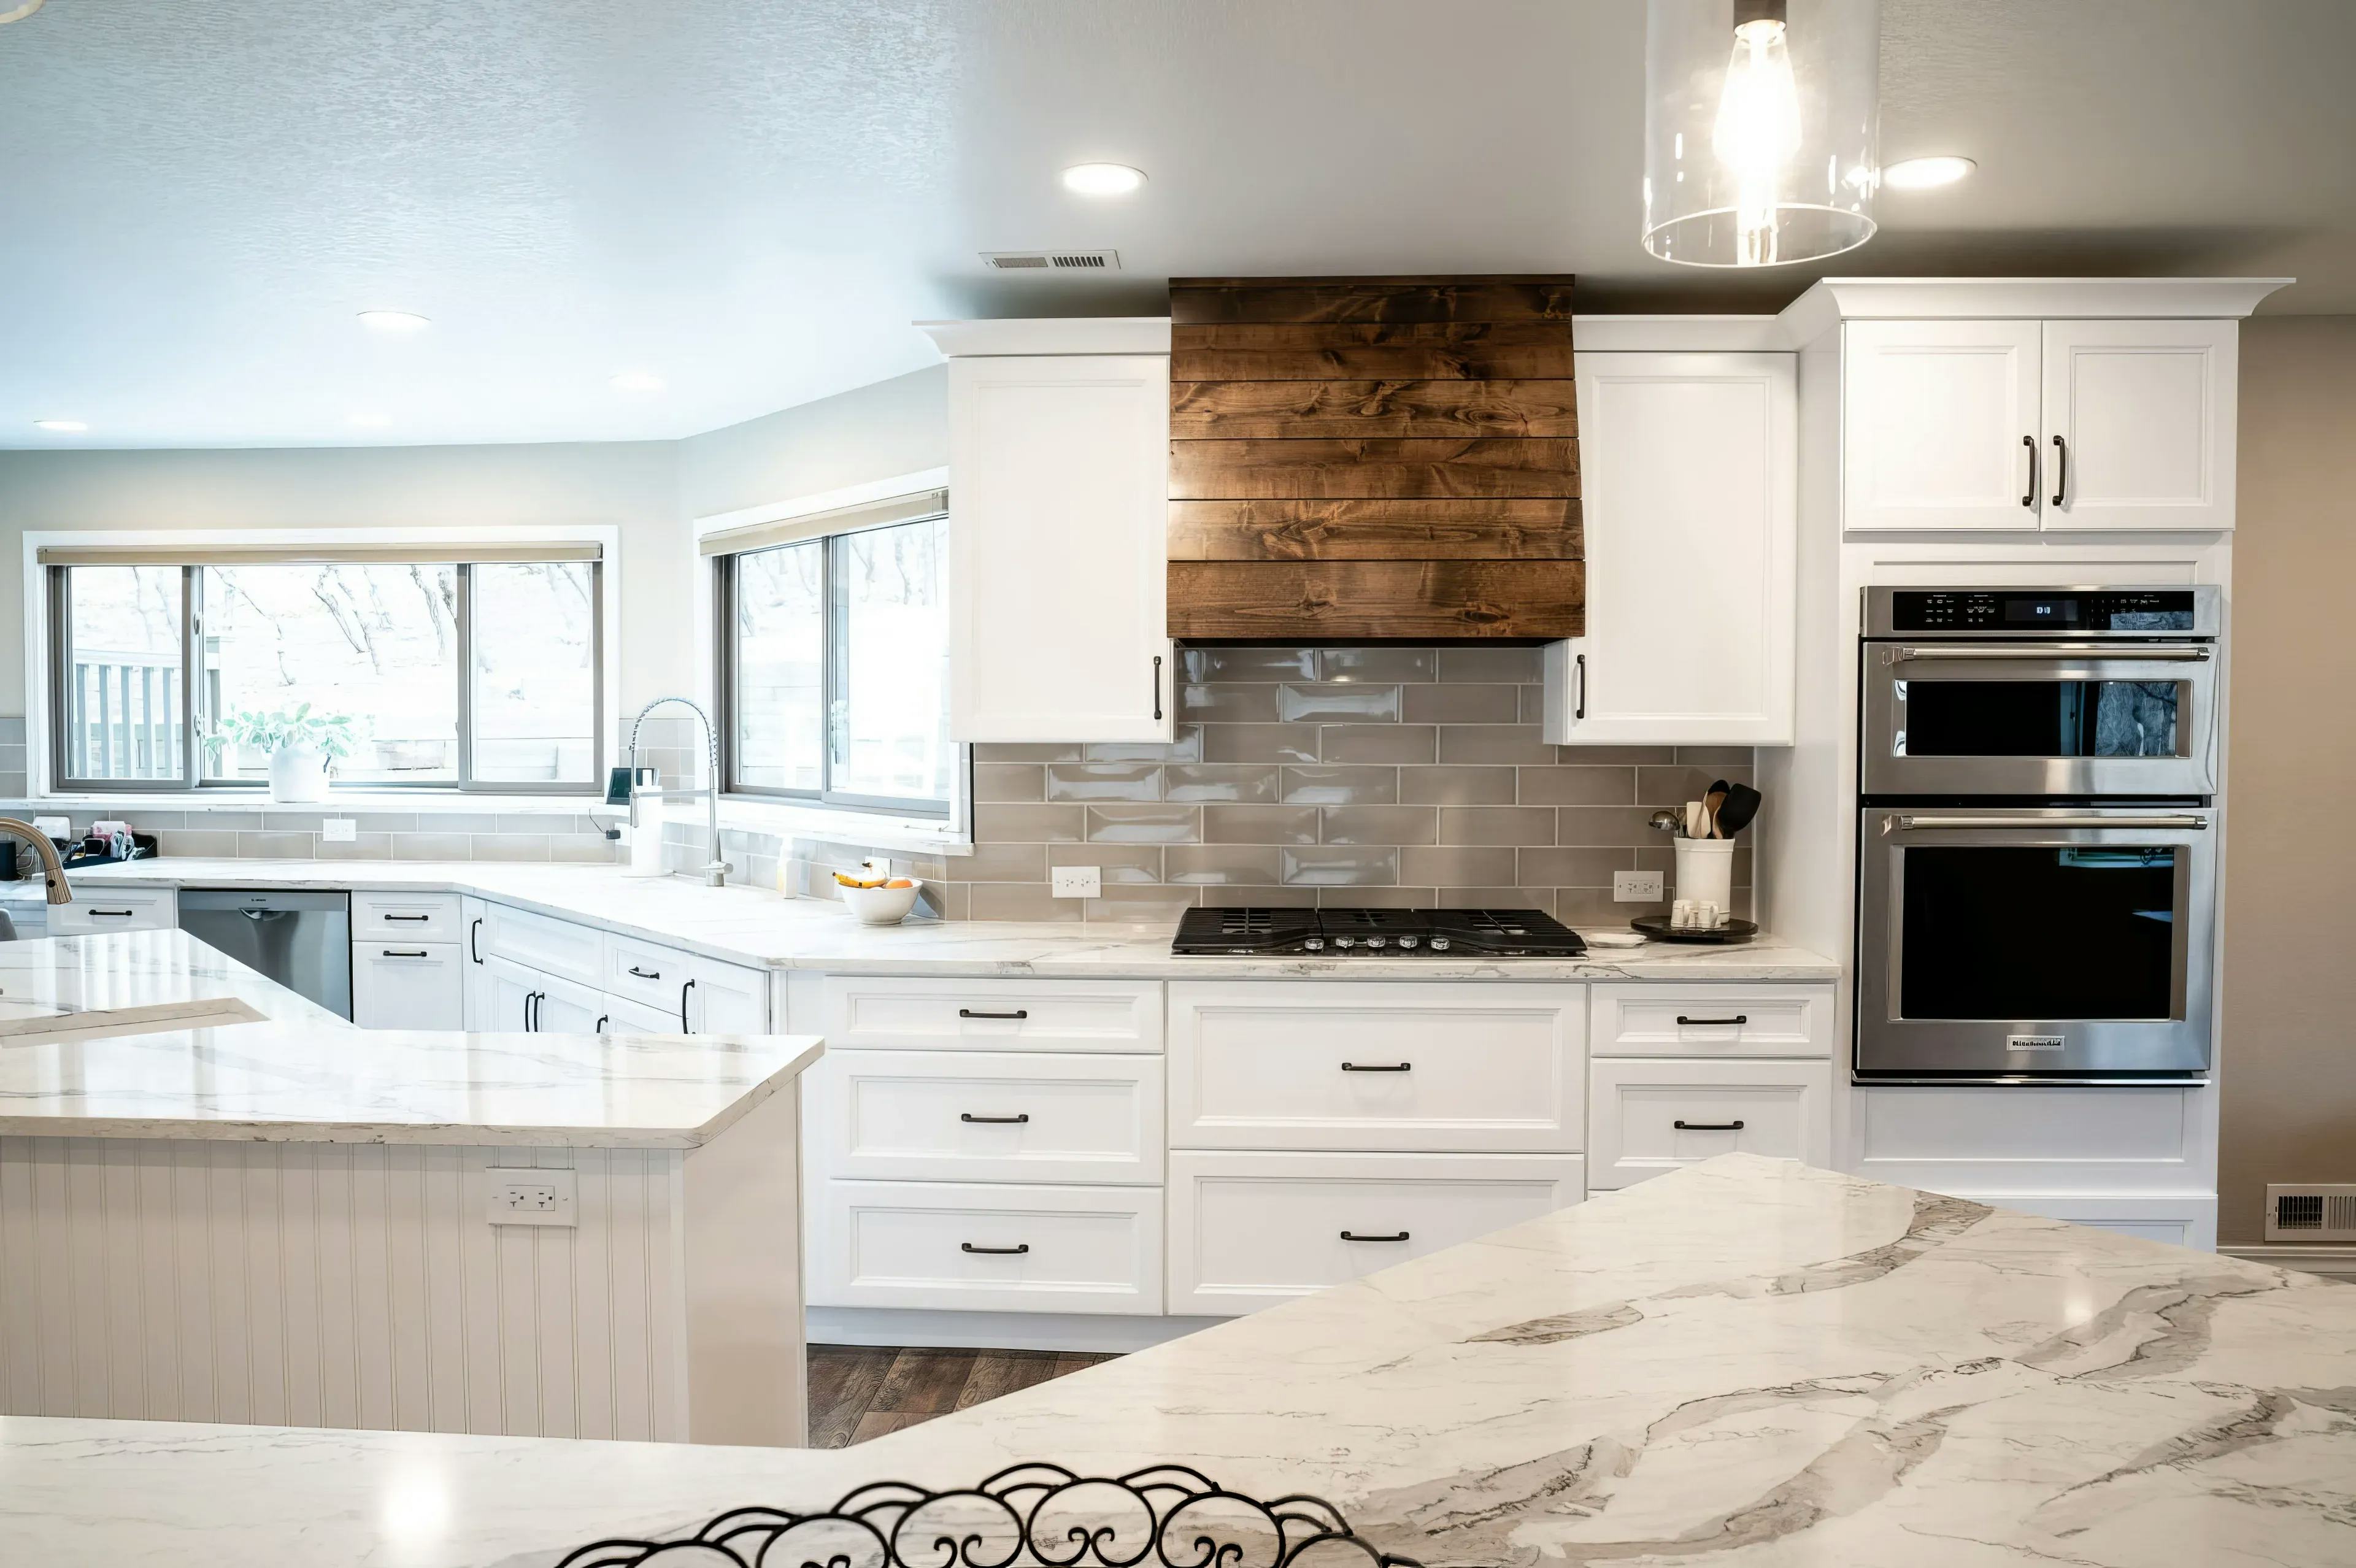 A newly remodeled kitchen with new wooden floors, white countertops, a breakfast bar, and a custom wooden oven hood crafted by Homefix in Colorado Springs